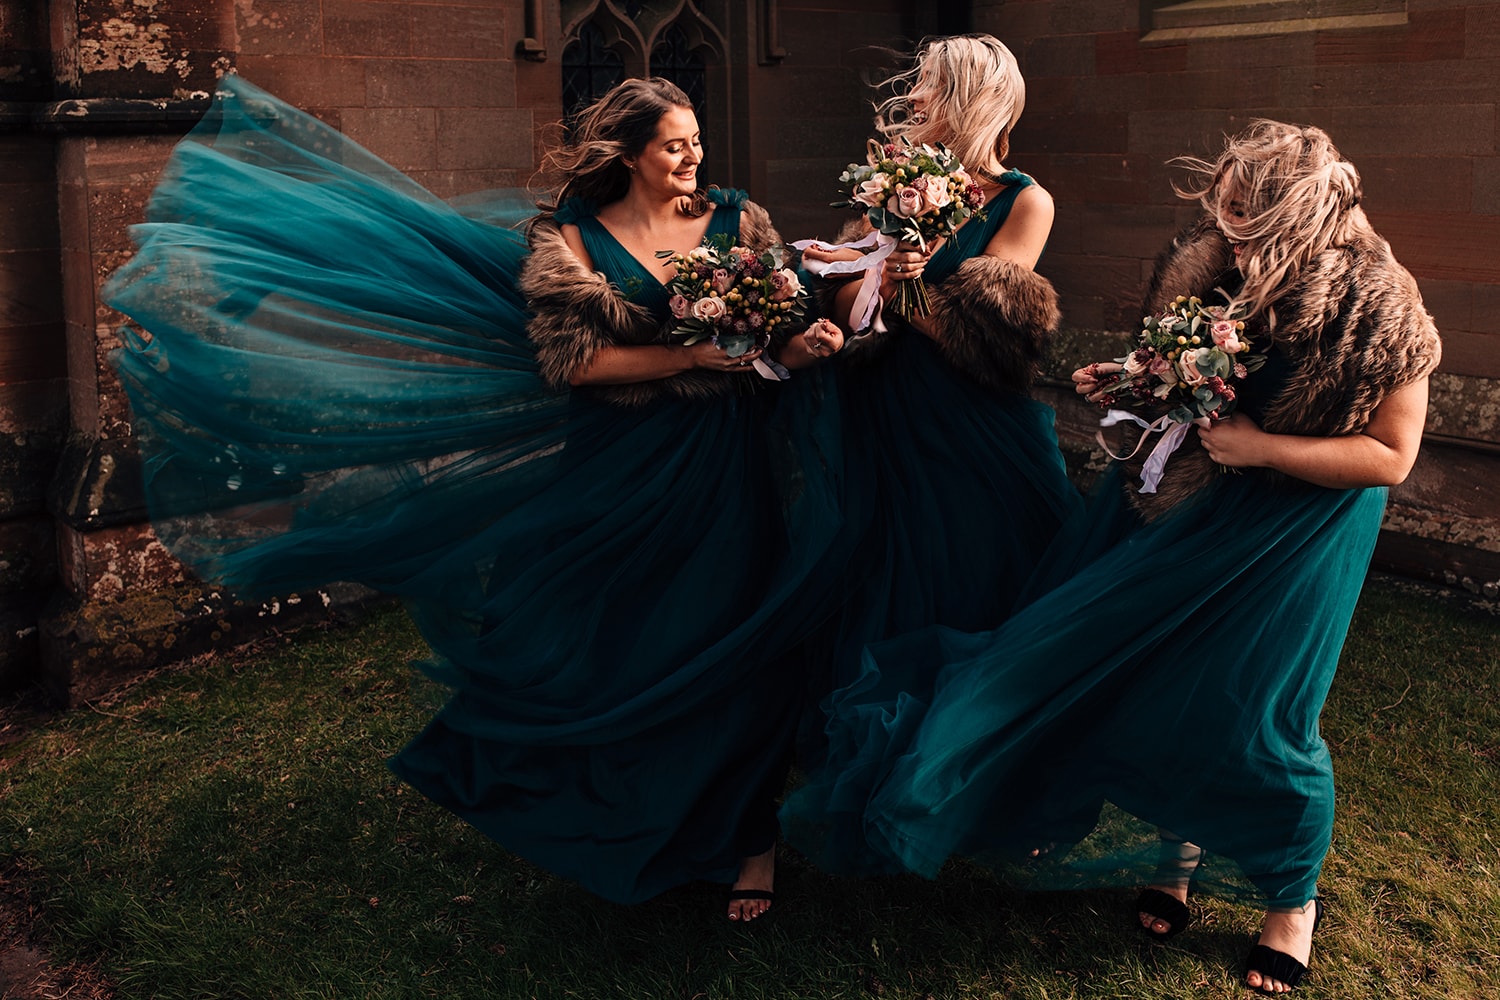 Award winning image of three bridesmaids battling the wind with their emerald dresses